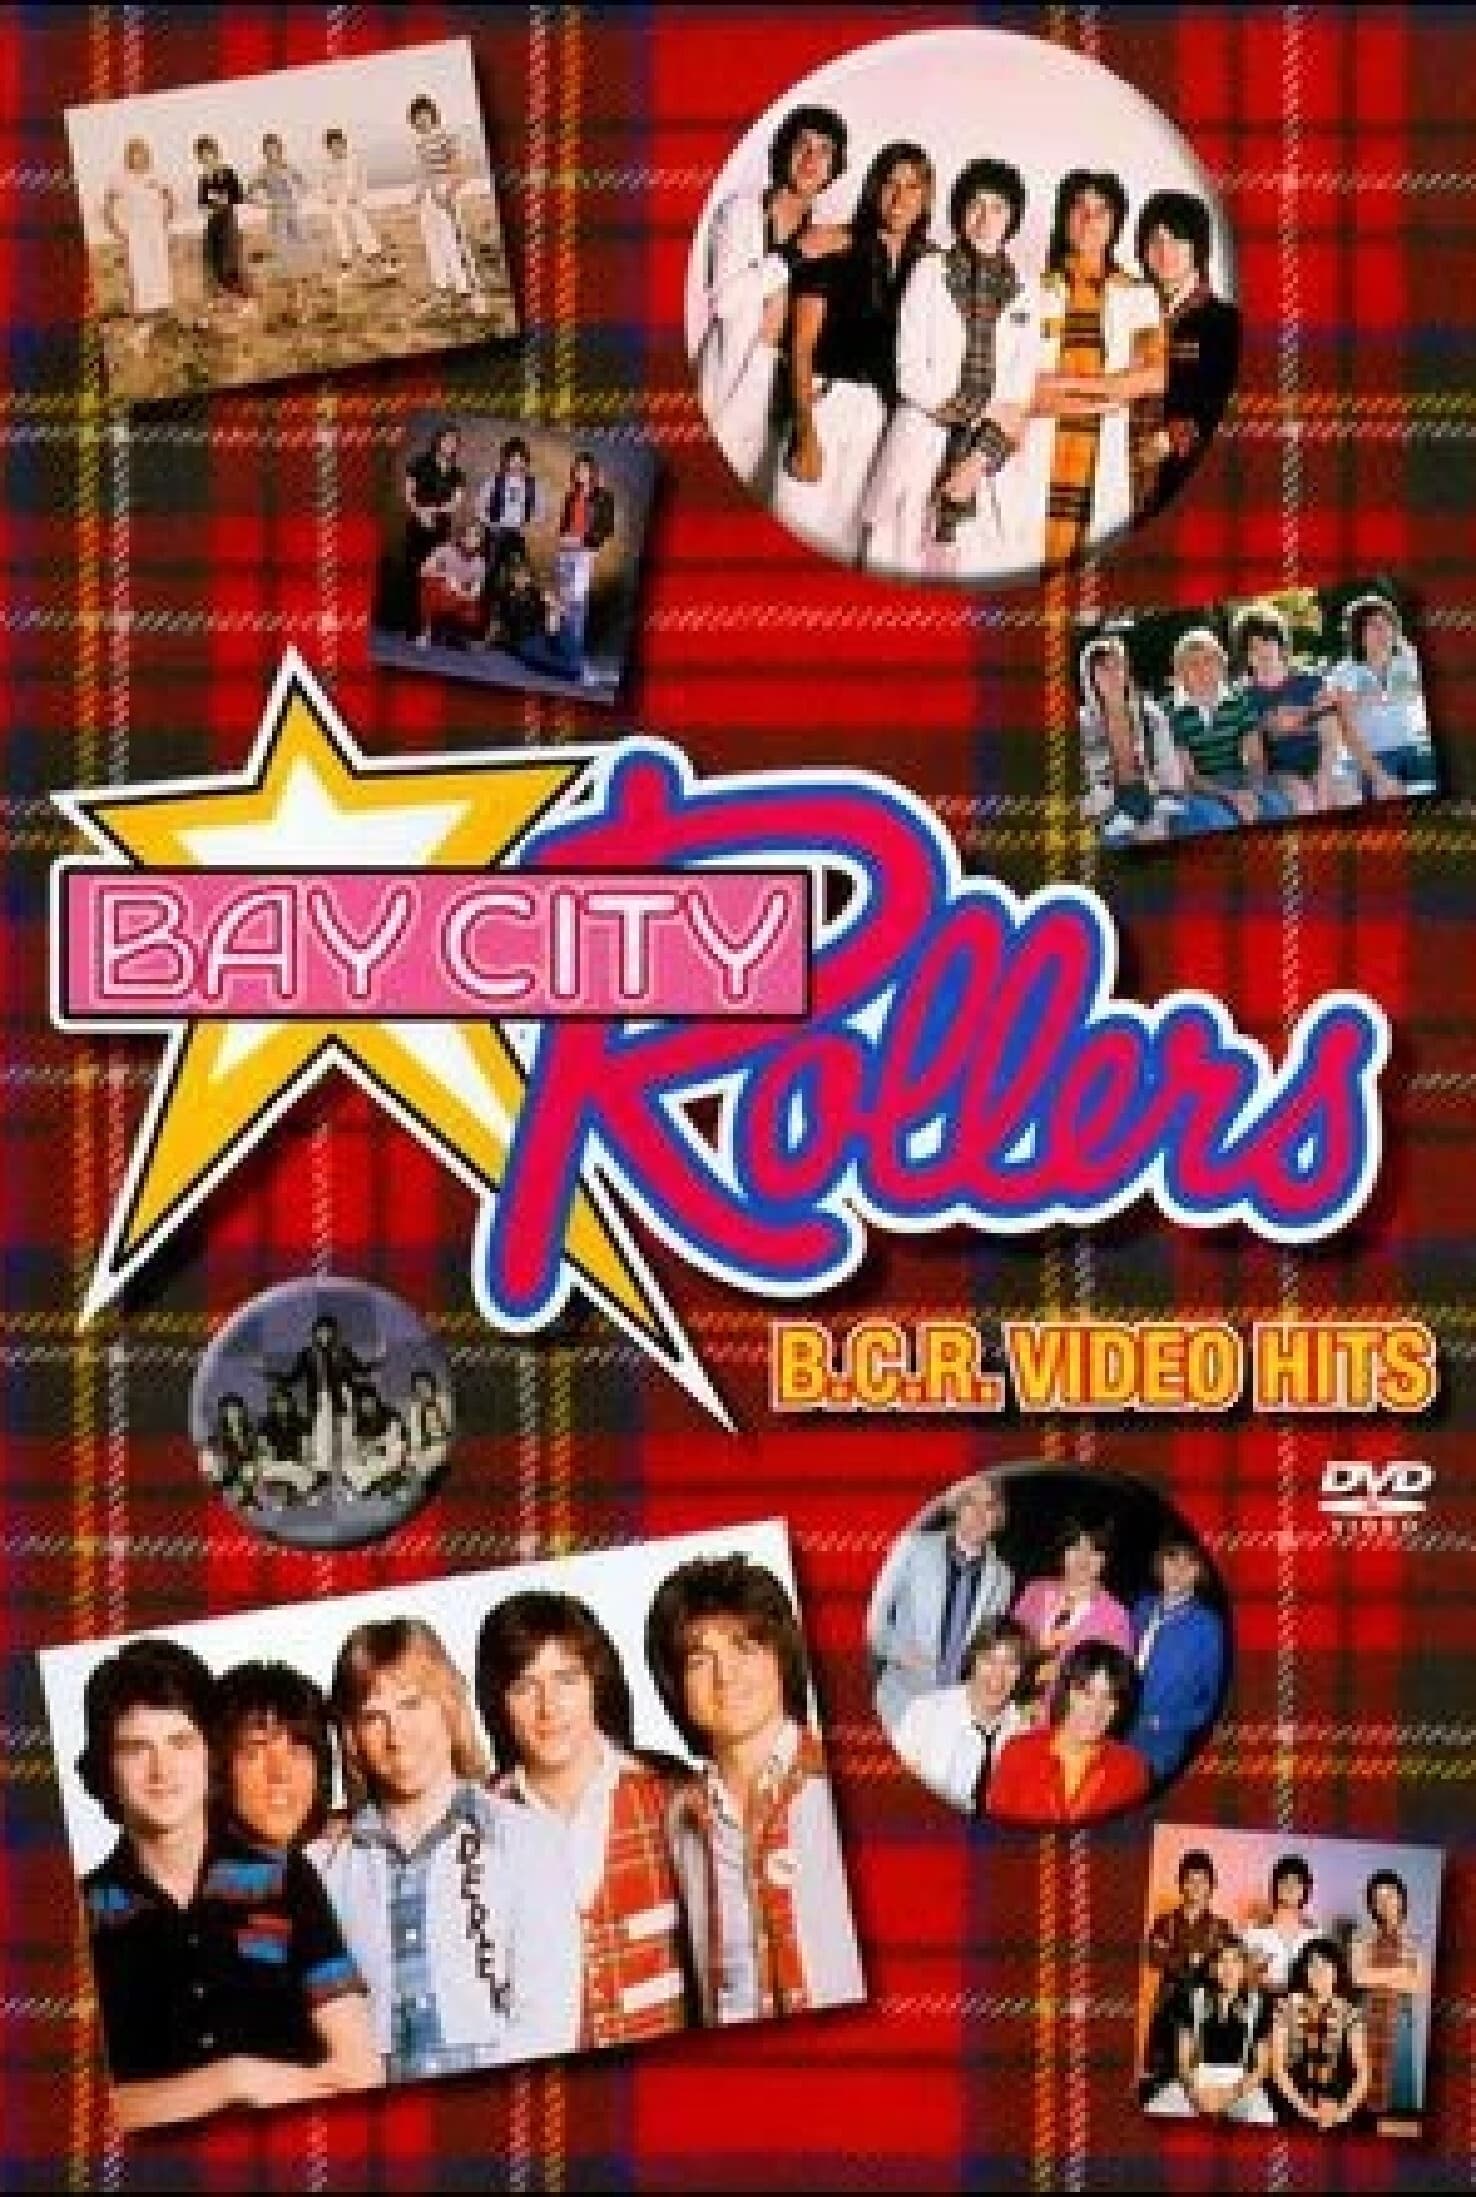 The Bay City Rollers: B.C.R. Video Hits